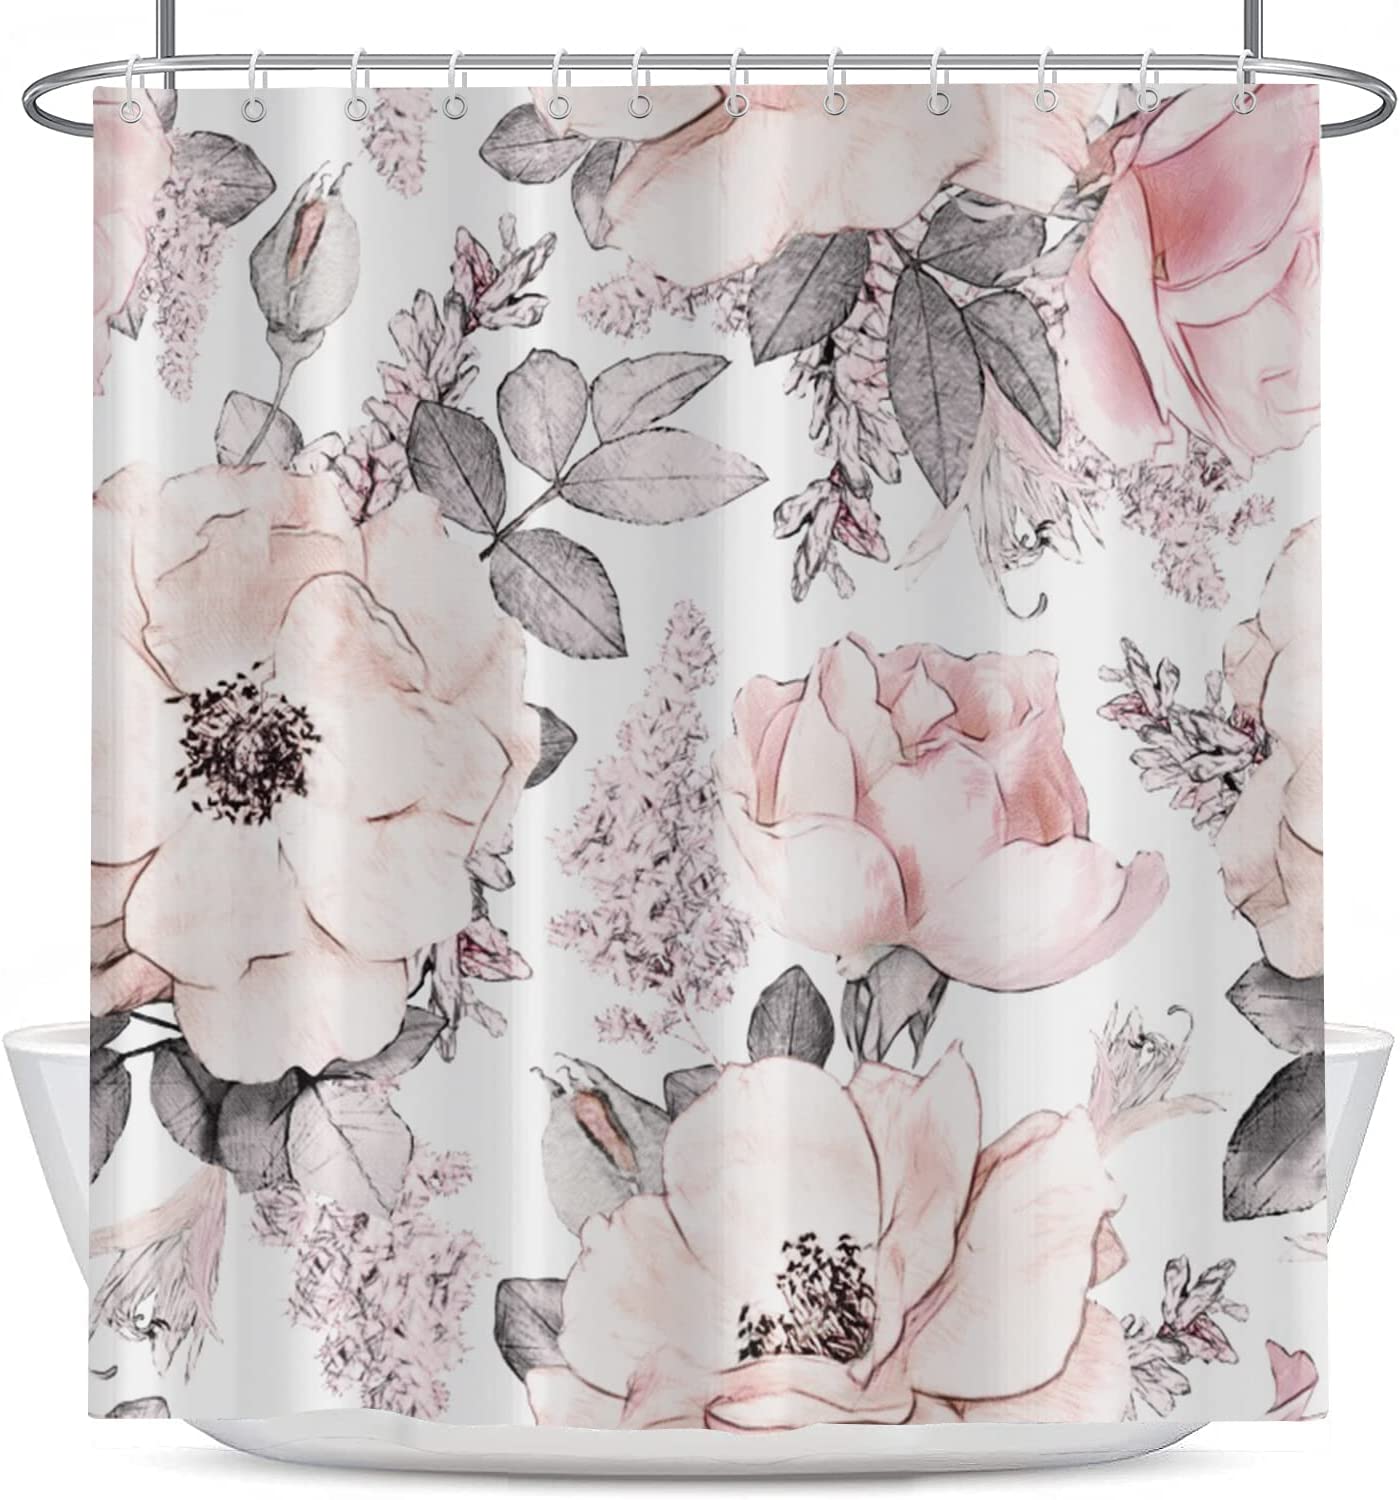 Pink Floral Shower Curtain, Pink and Grey Watercolor Rose Blossom Ink Painting Art Bathroom Curtain for Spring Bathtub Home Decor Waterproof Fabric Machine Washable with 12 Hooks - image 4 of 6